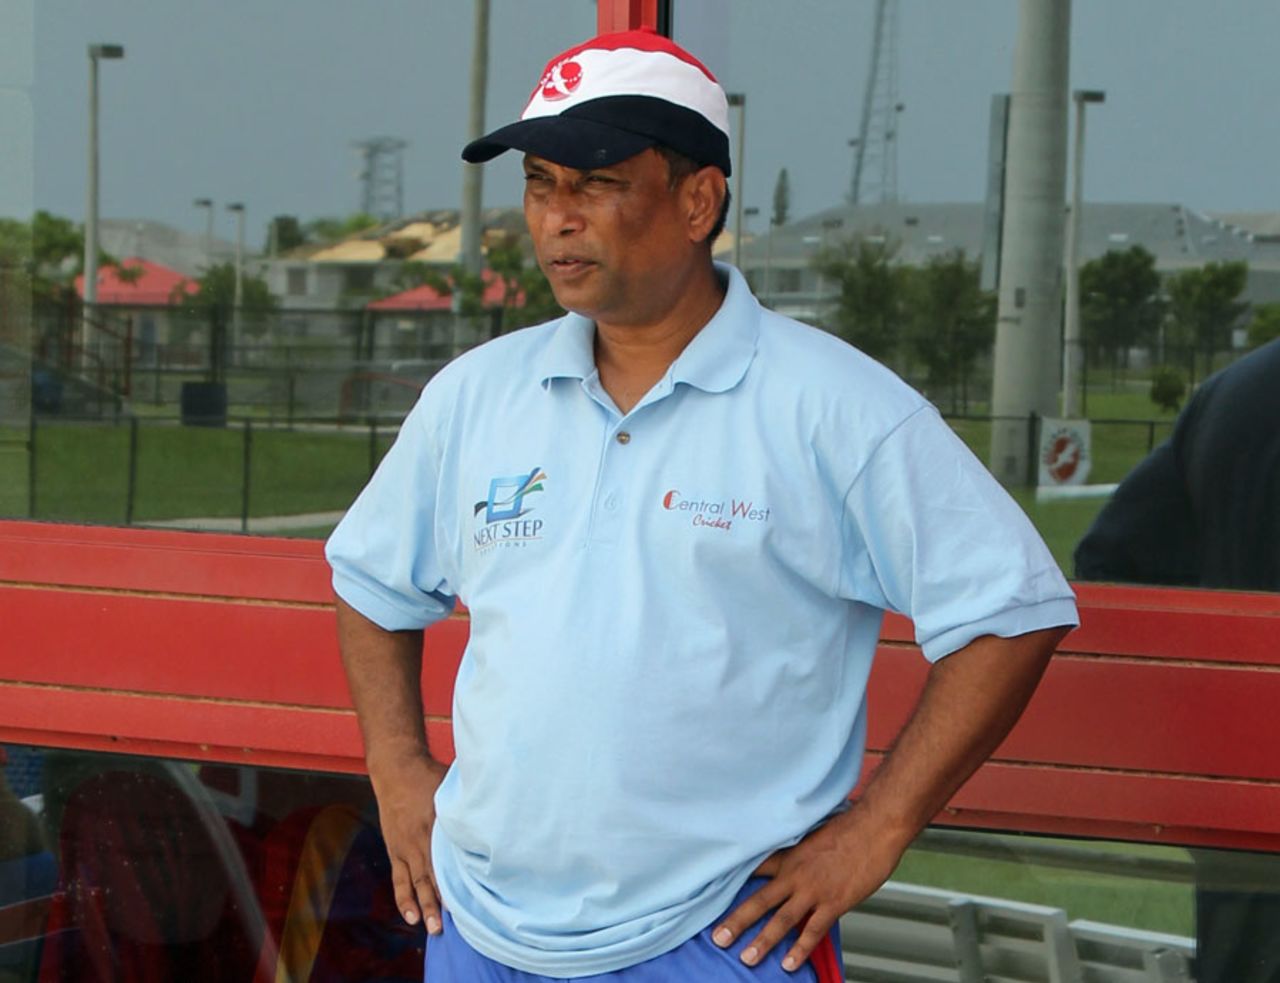 Asif Mujtaba, coach of the Central West Region